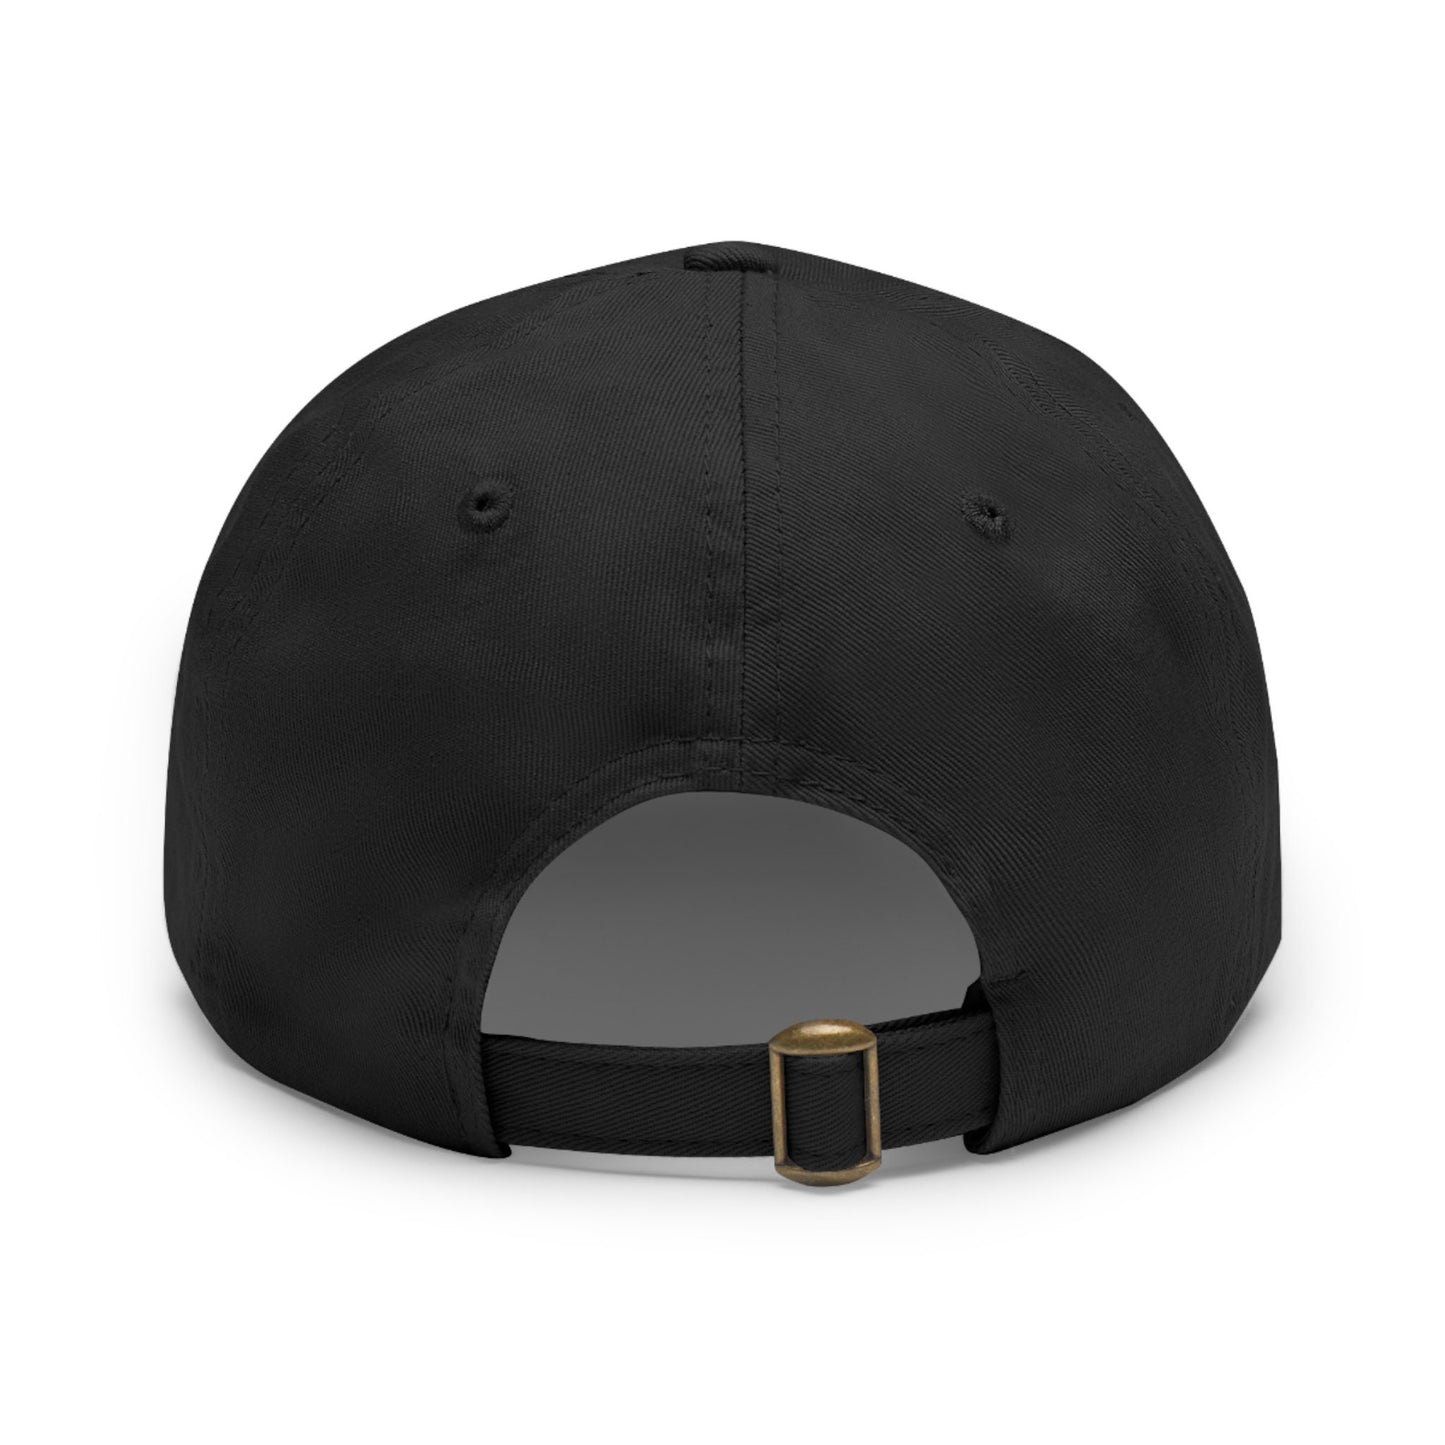 Haiti Strong Dad Hat with Leather Patch (Rectangle)